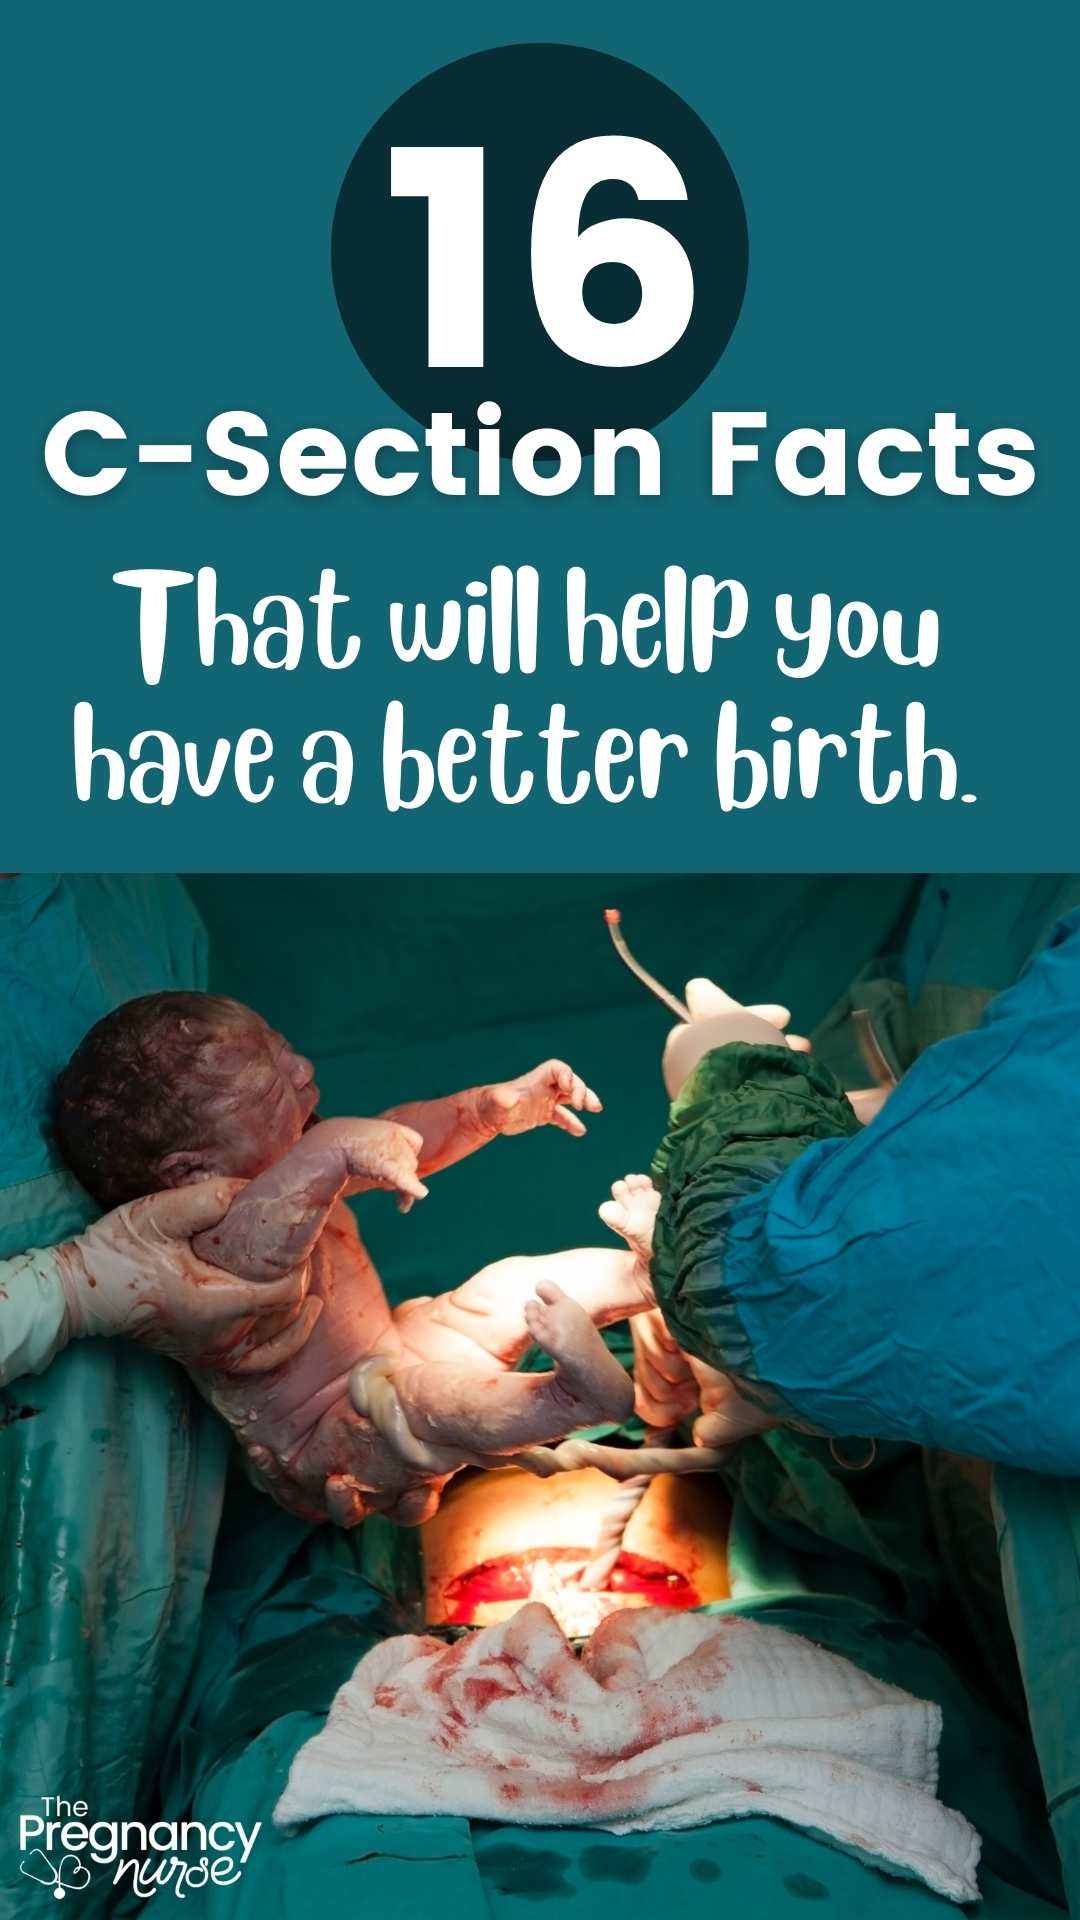 16 C-Section Facts For a Better Birth!